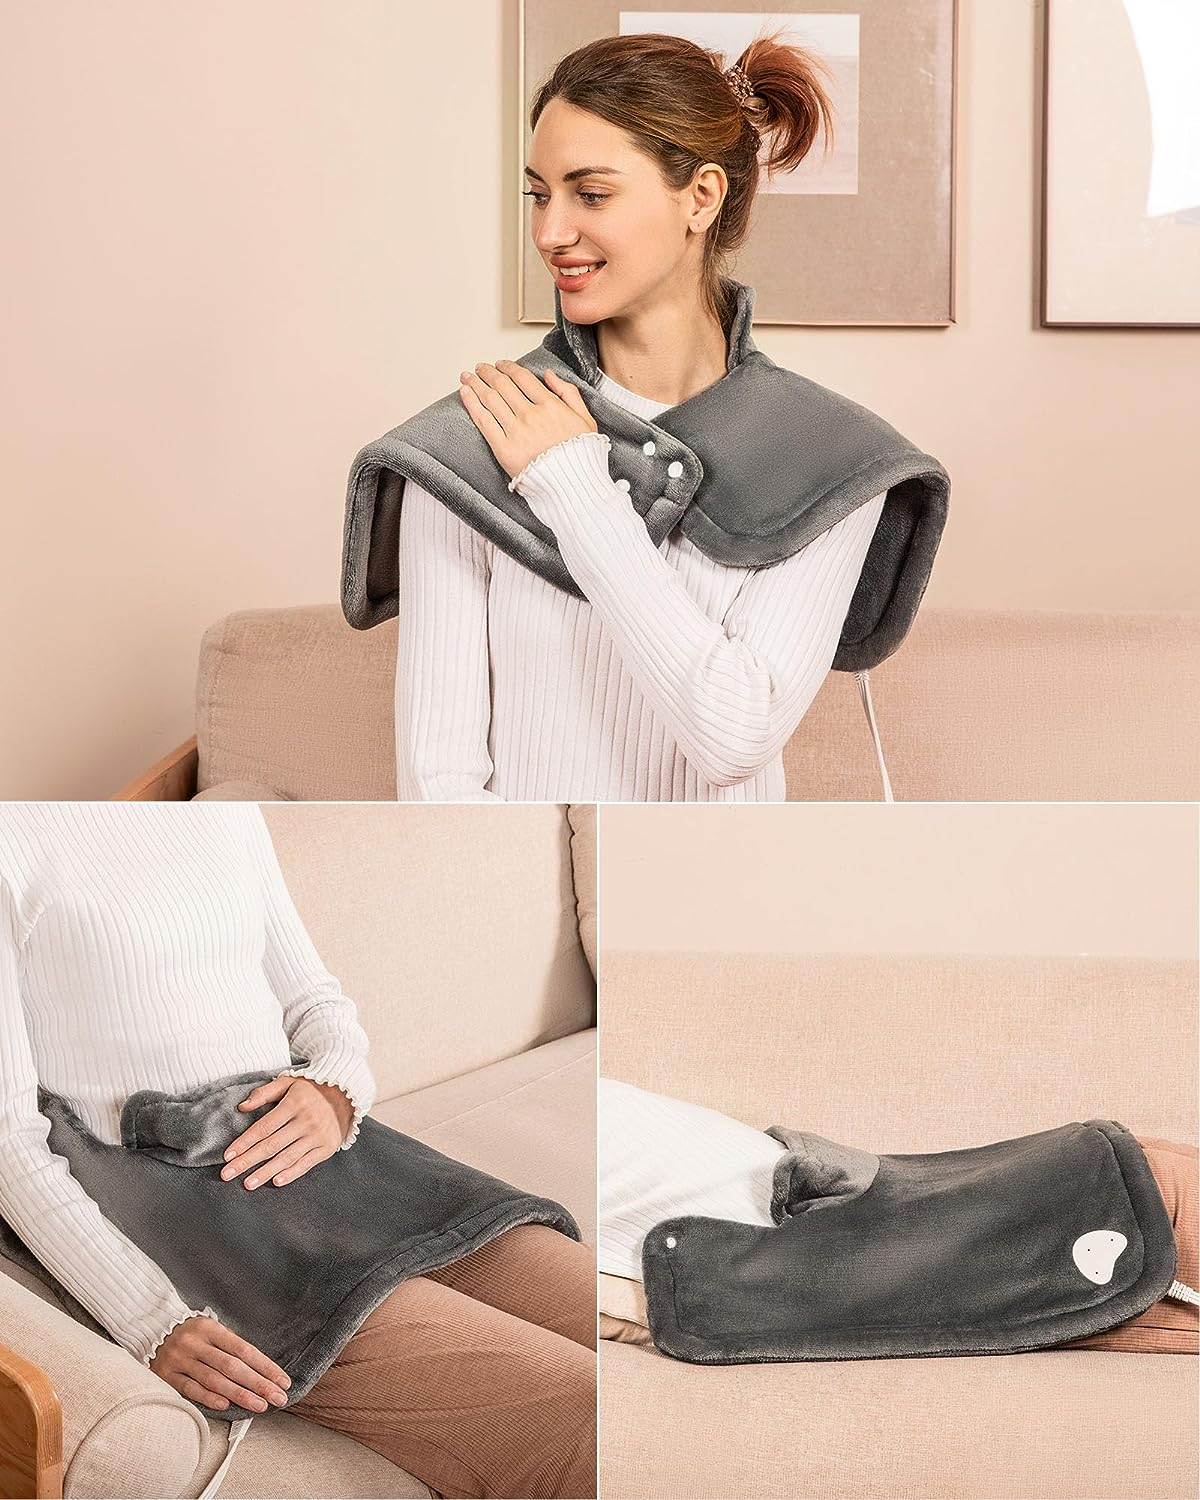 ALLJOY Extra-Large 24x17" Neck and Shoulder Heating Pad